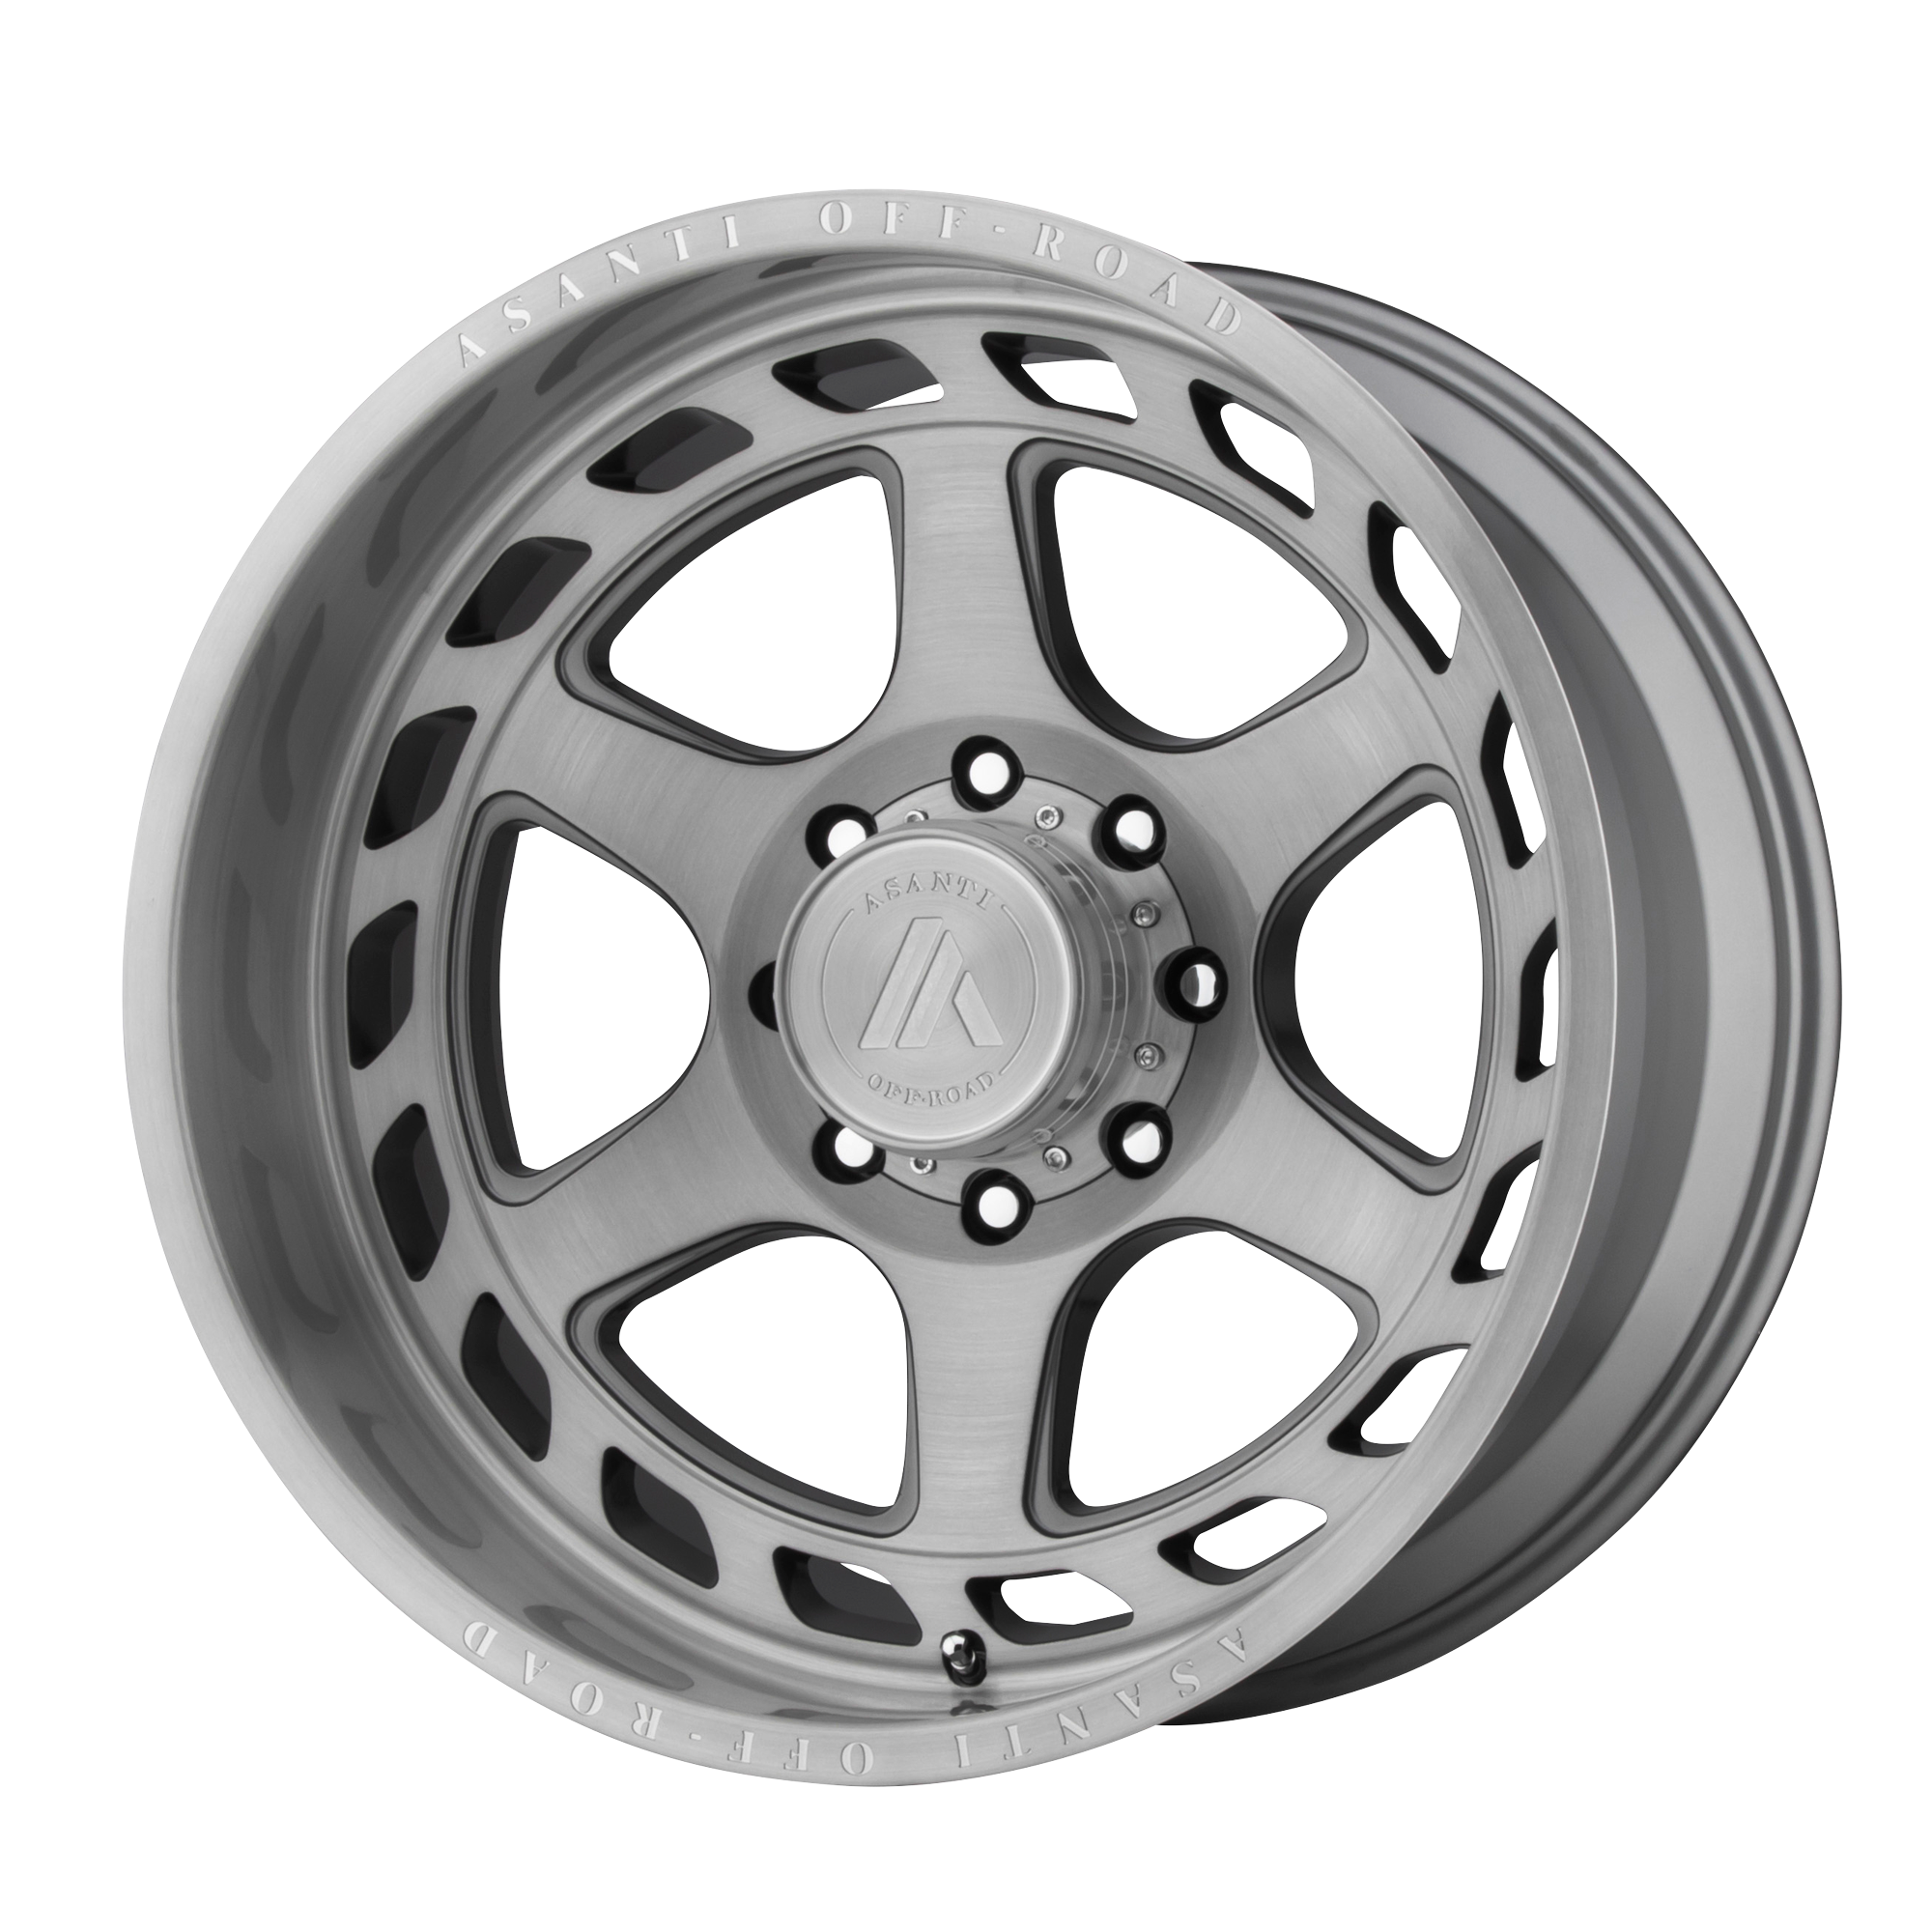 ANVIL 20x10 6x135.00 TITANIUM-BRUSHED (-18 mm) - Tires and Engine Performance